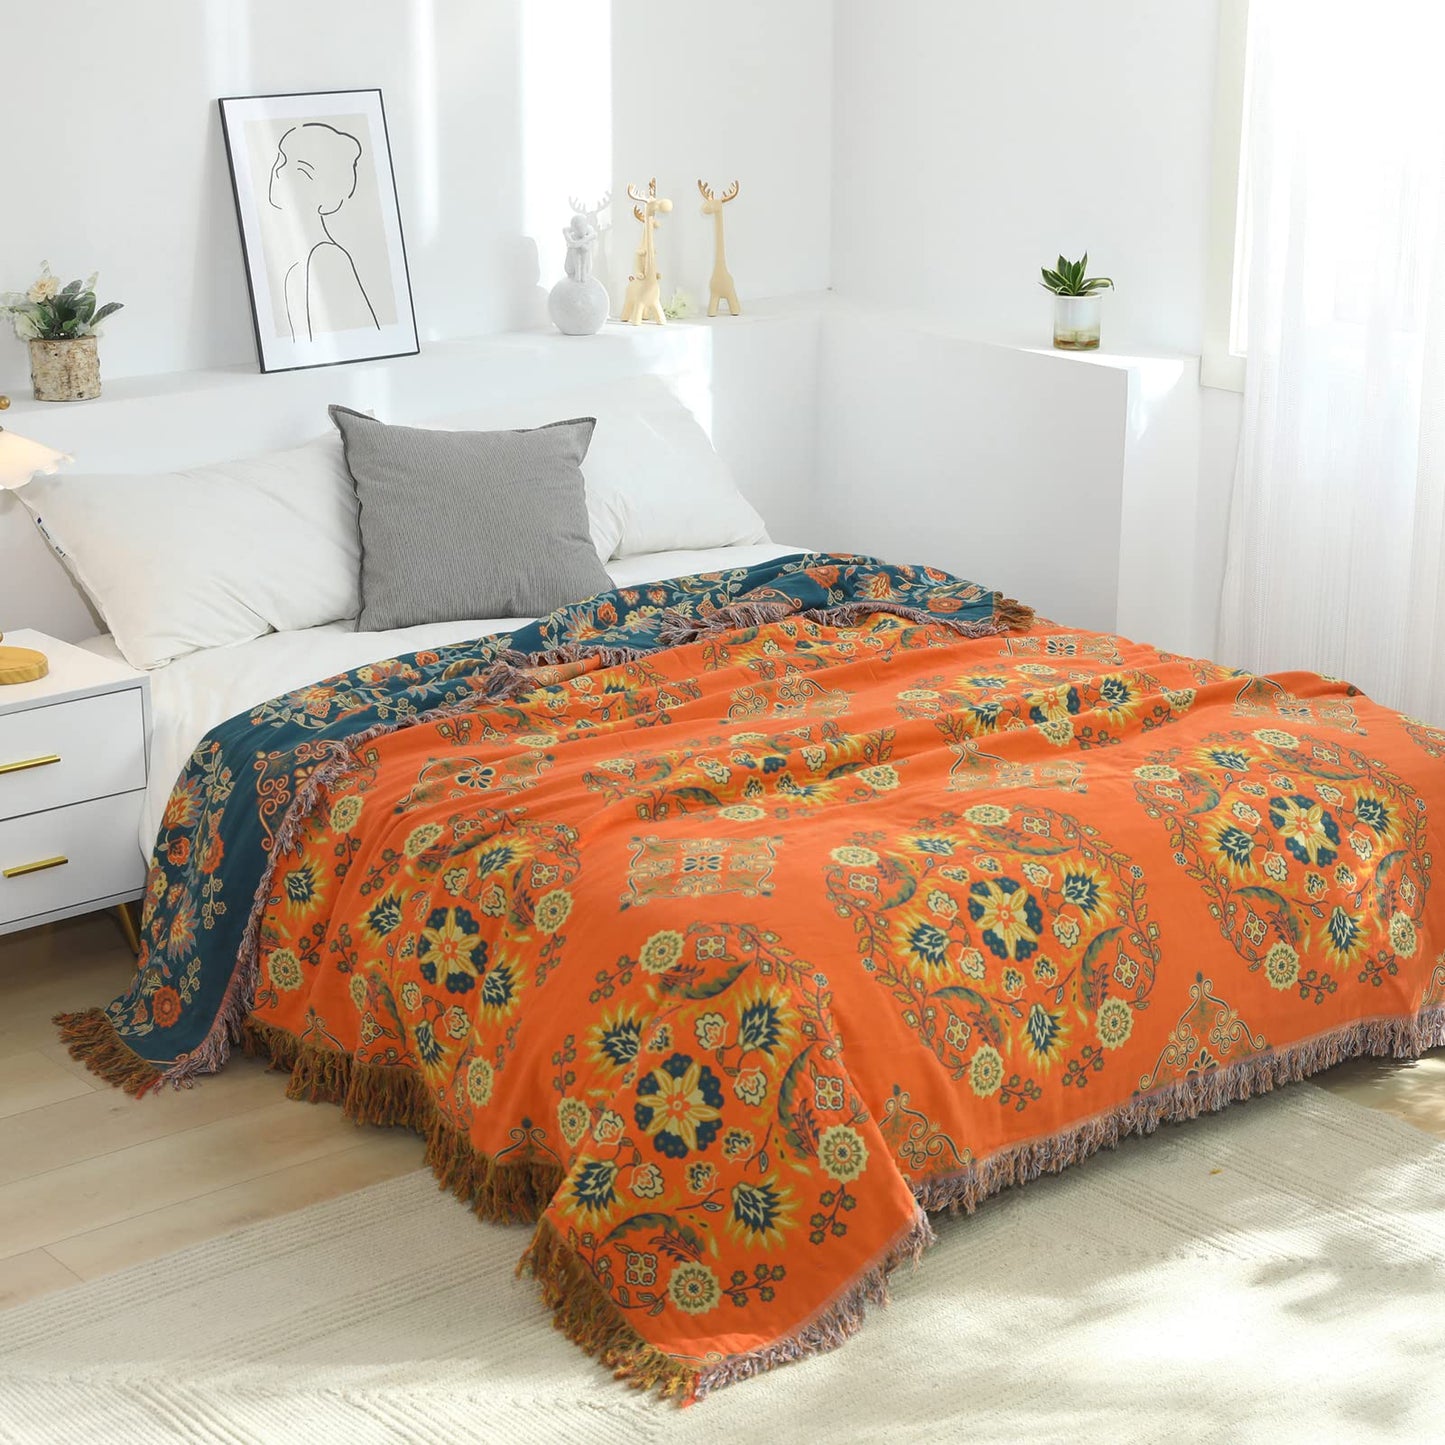 Vintage Throw Blanket Bed Sofa Cover